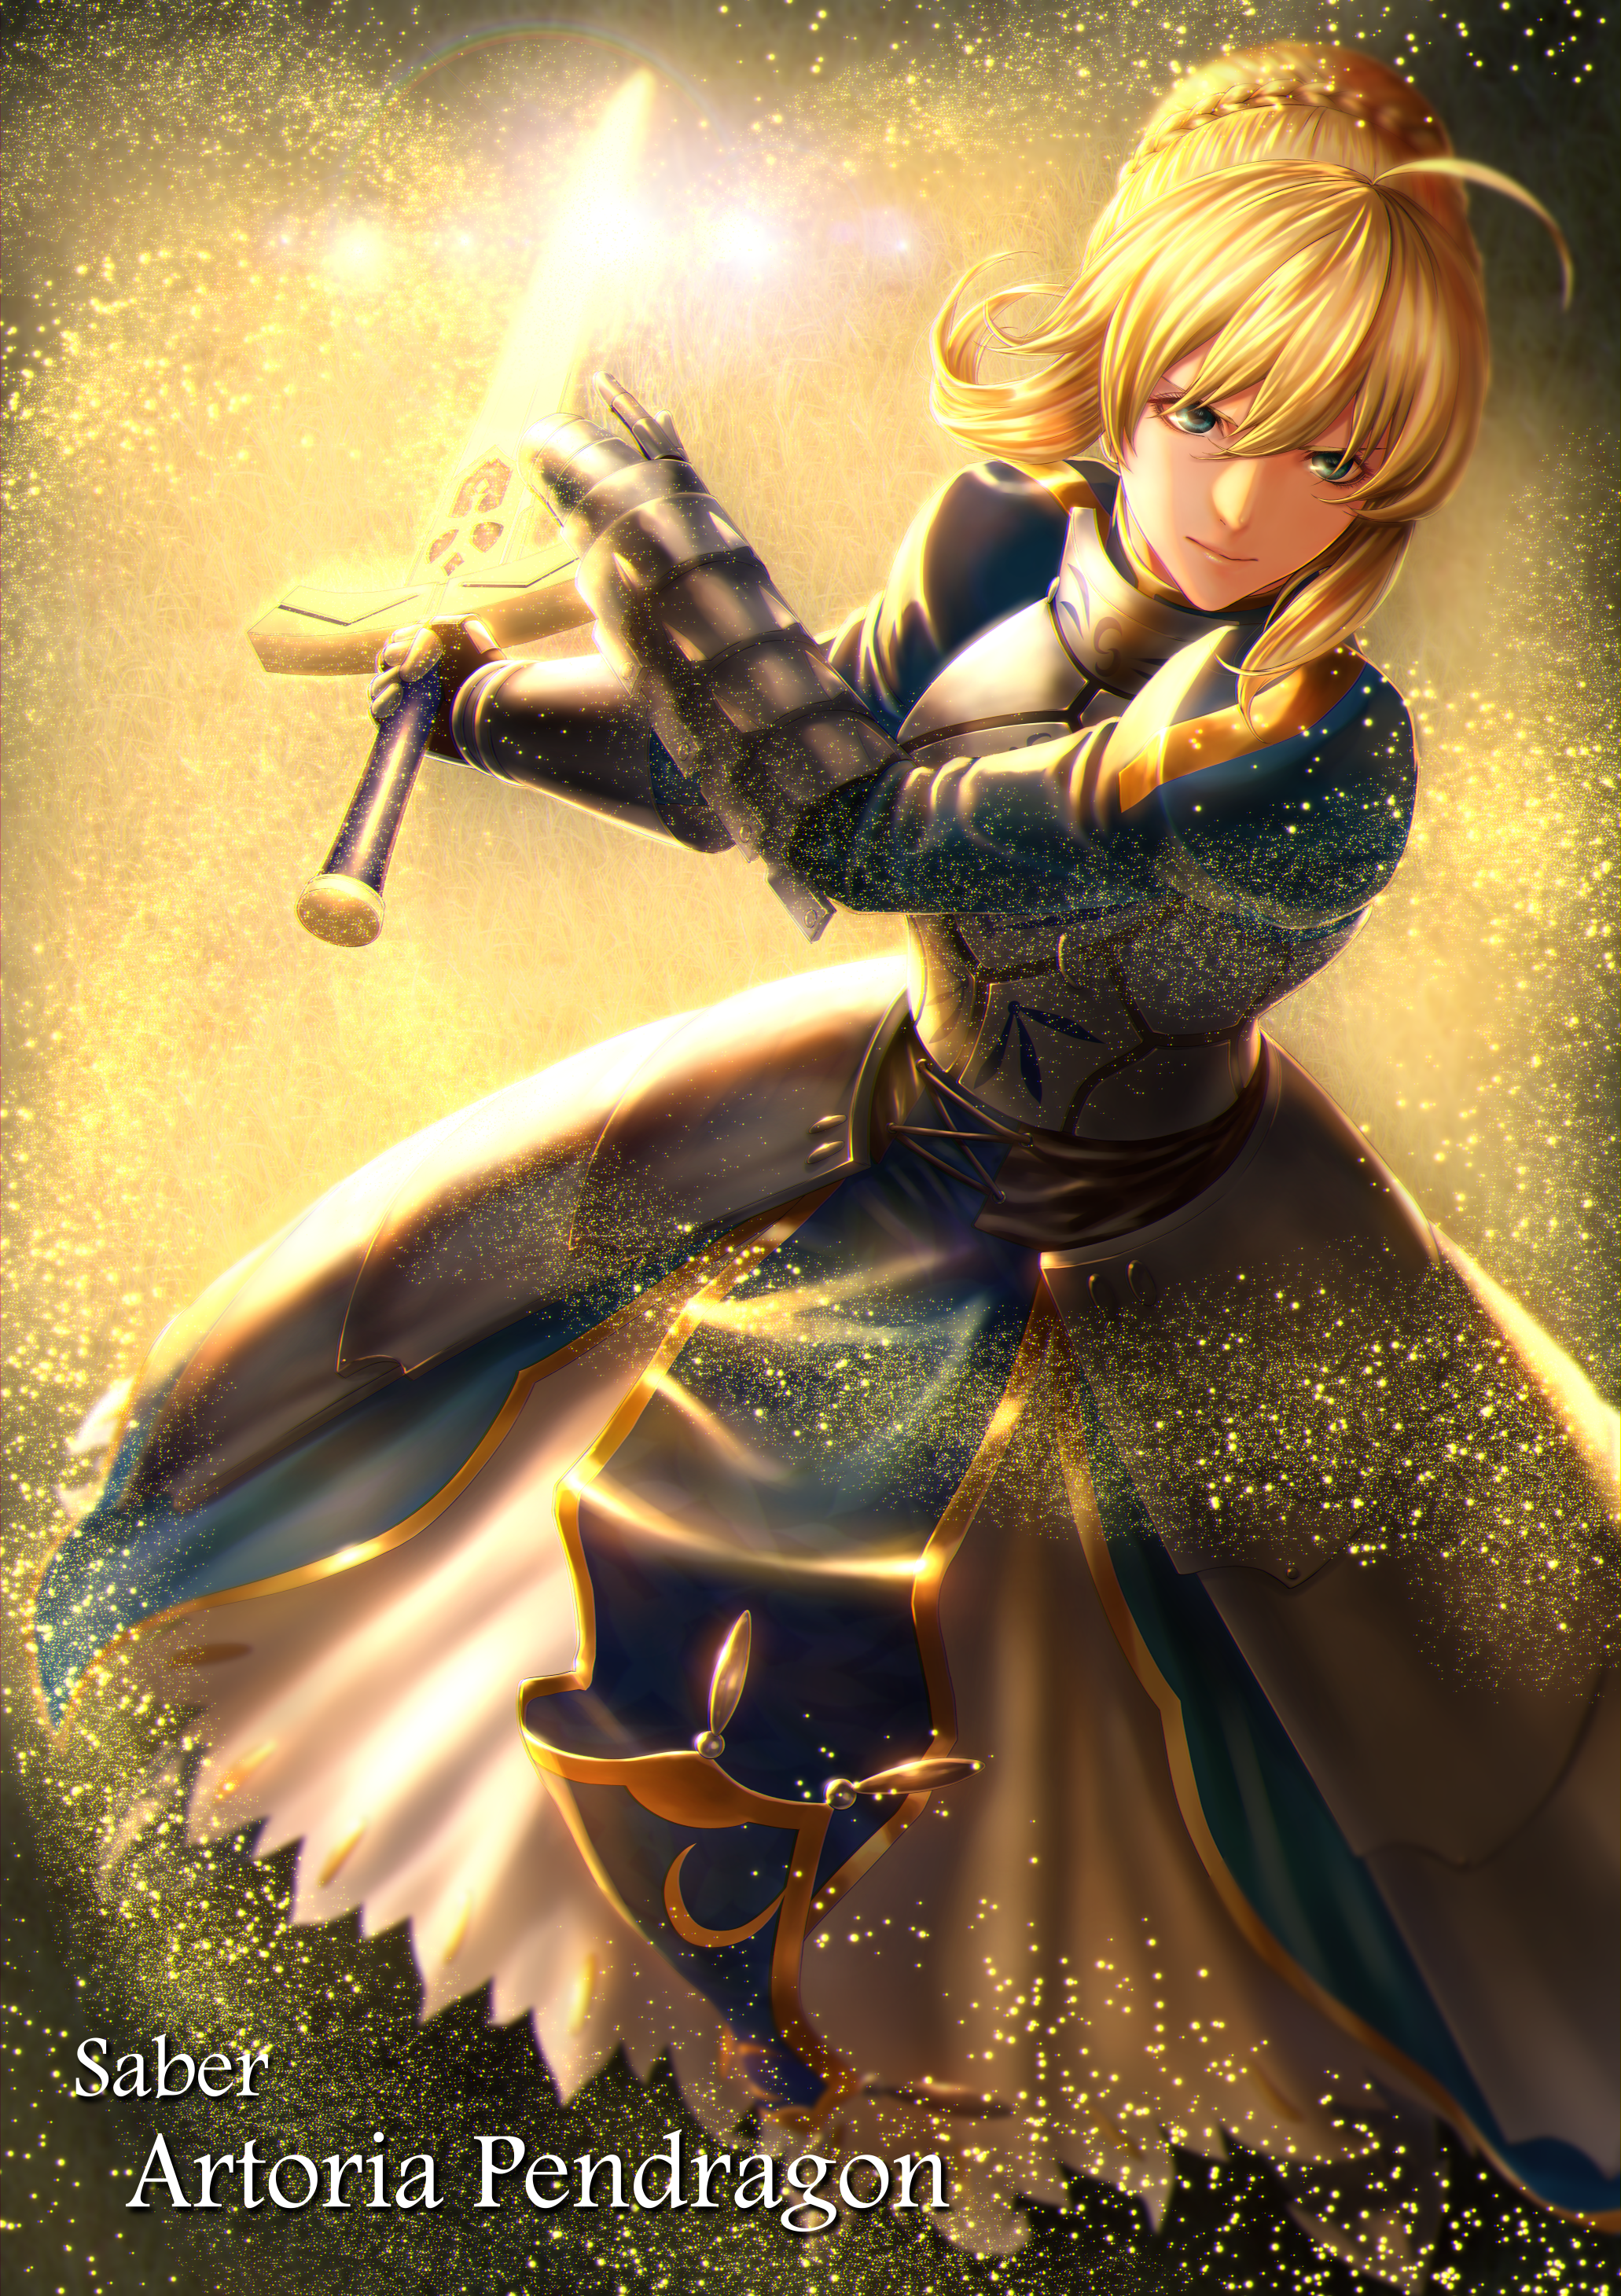 Anime 2062x2921 Fate/Zero Fate/Stay Night Fate series ahoge armored woman fan art 2D women with swords green eyes long hair bangs gauntlets blue dress Excalibur standing glowing anime girls Saber Artoria Pendragon portrait display anime female warrior blonde floating particles fantasy art artwork Mugetsu Illust